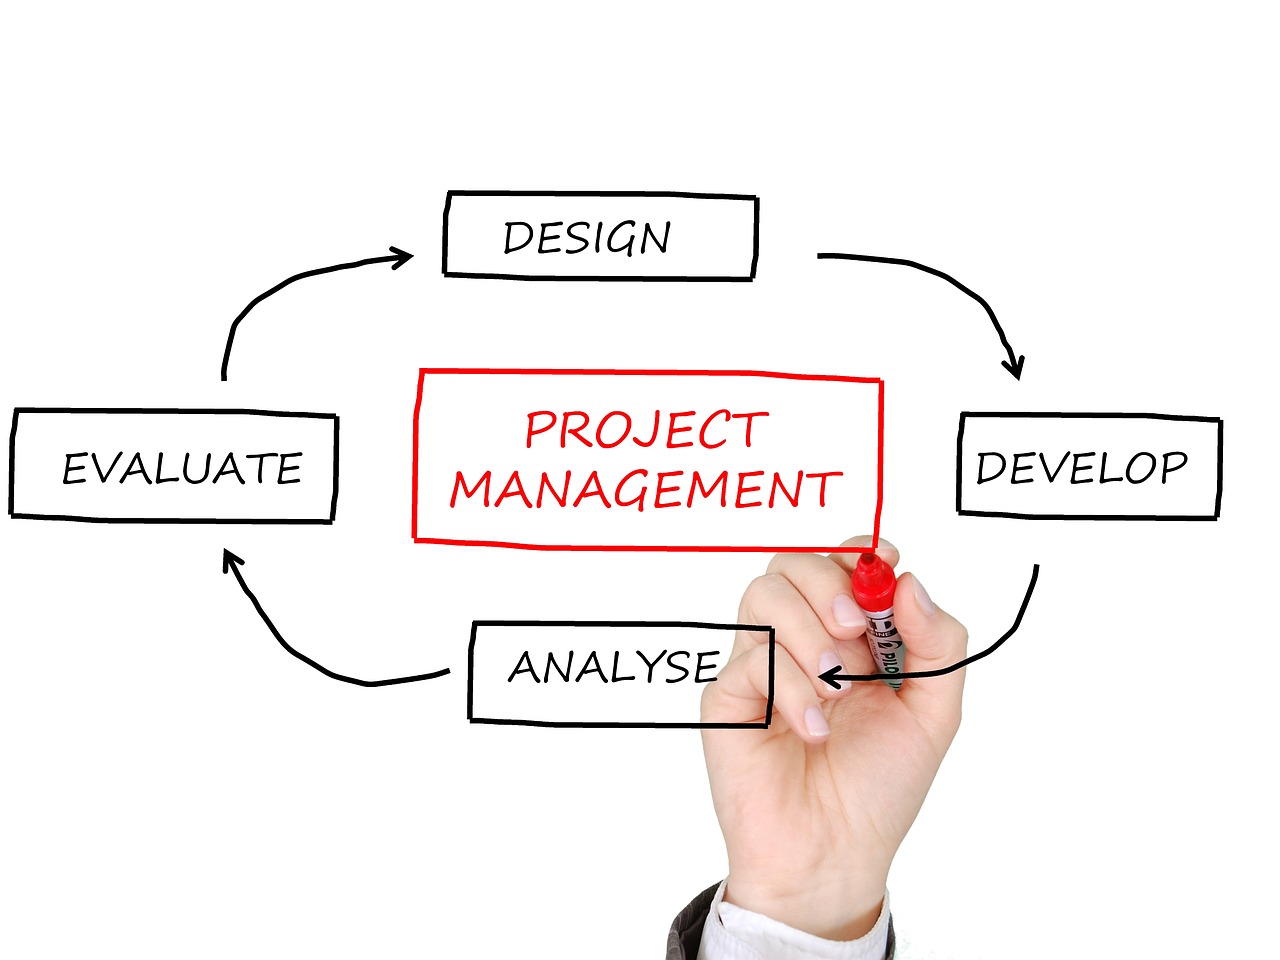 project-management-ged497baea_1280